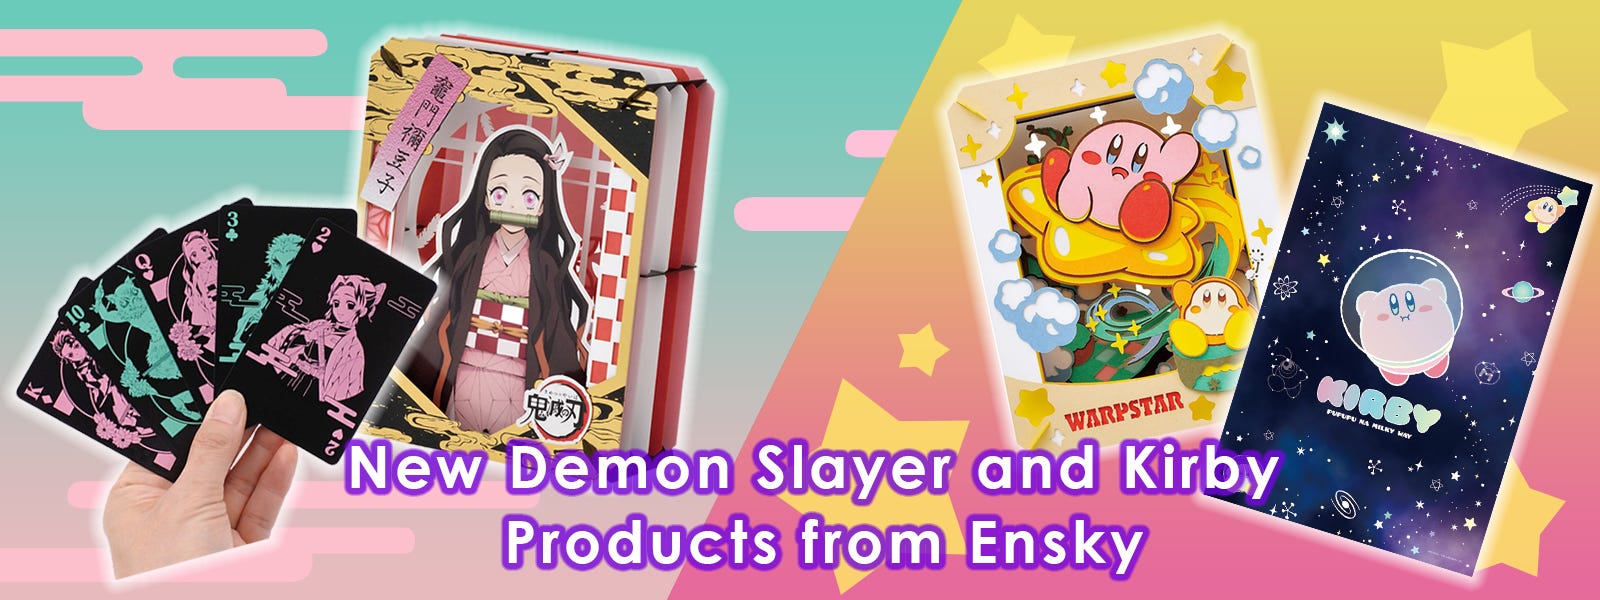 New Demon Slayer and Kirby Products from Ensky